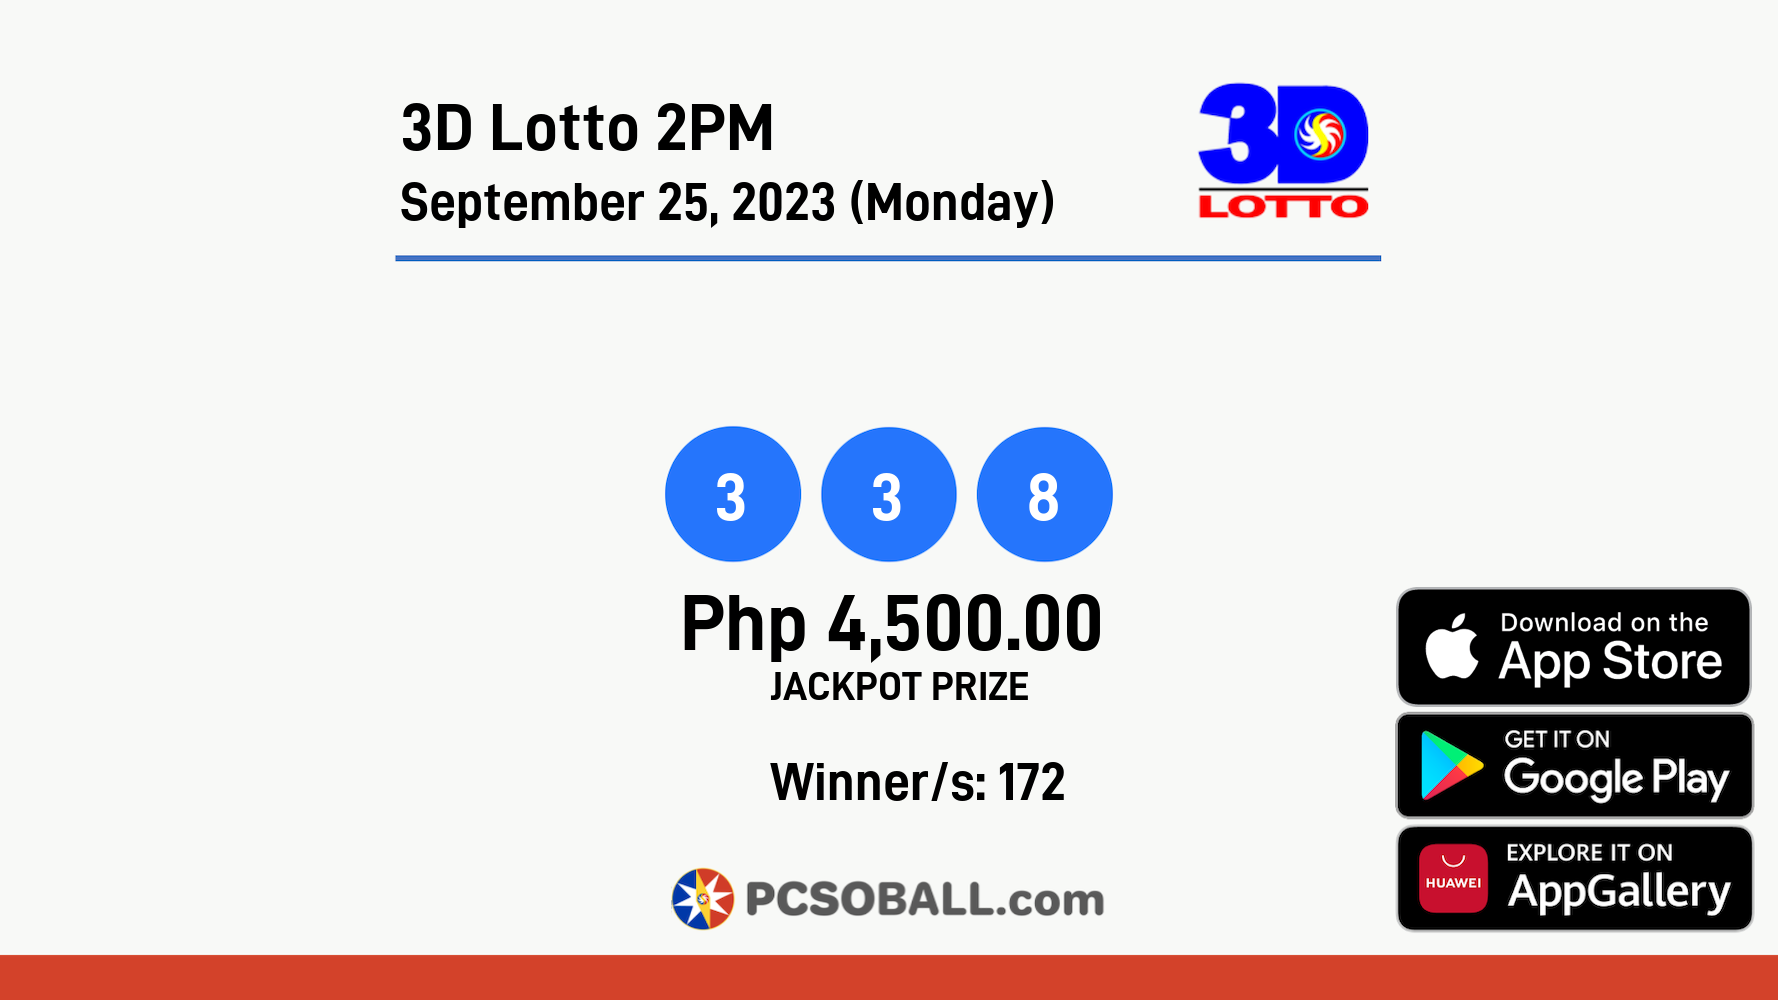 3D Lotto 2PM September 25, 2023 (Monday) Result